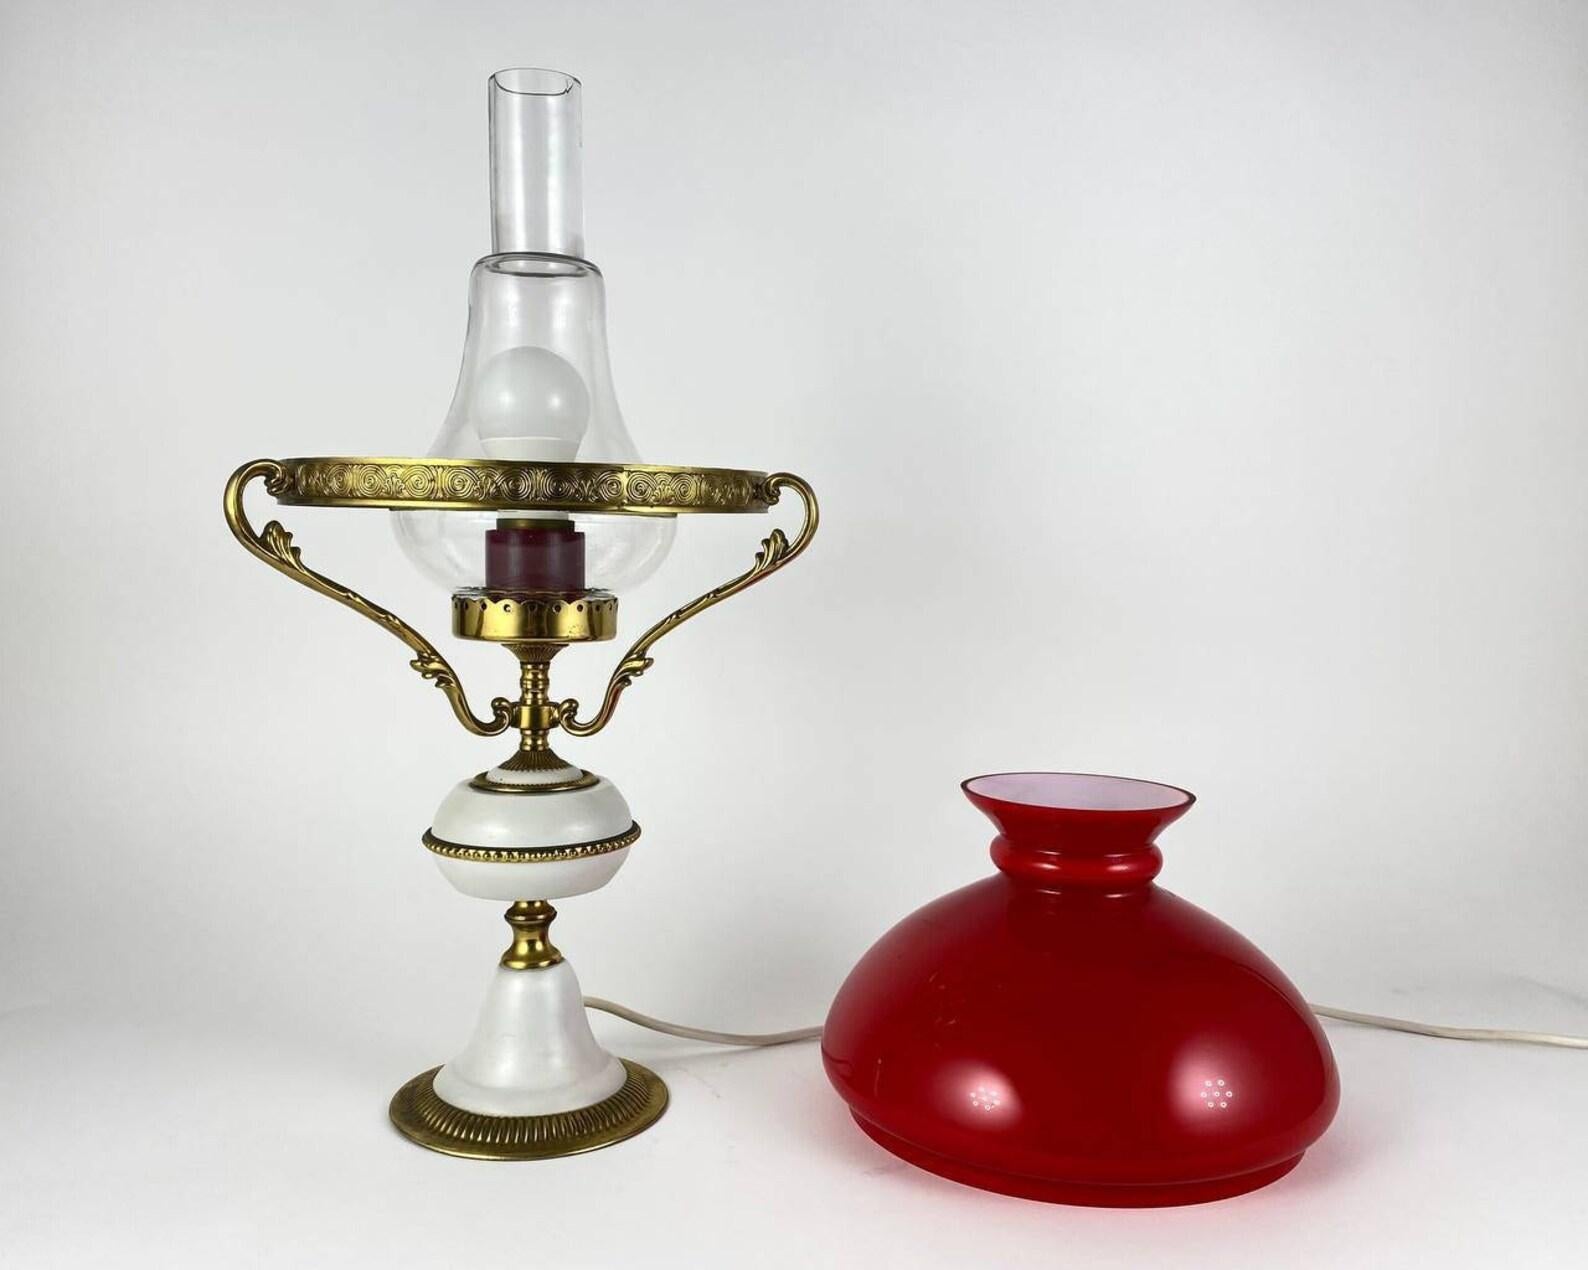 Metal Vintage Belgian Table Lamp with Gilt Bronze and Red Glass Lampshade Lamp, 1970s For Sale